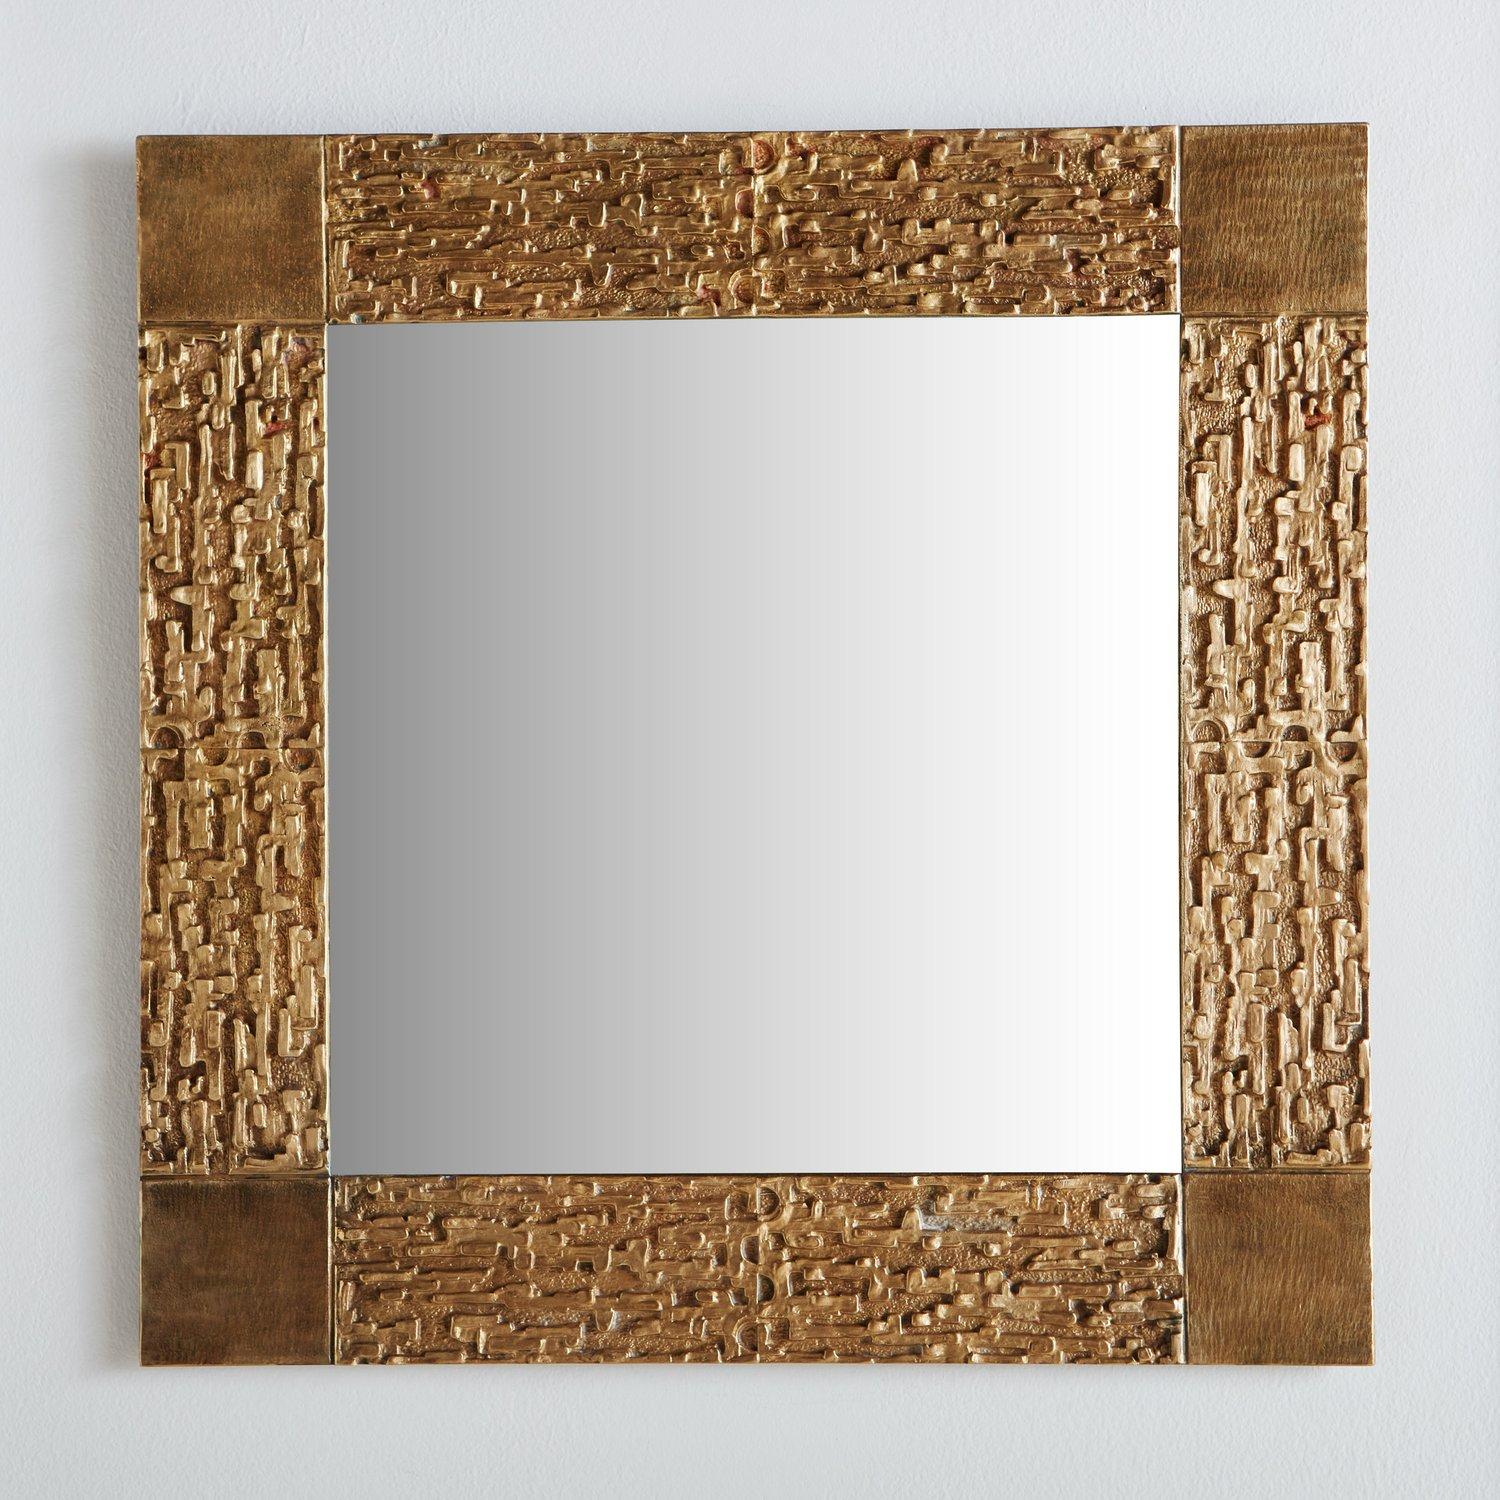 A brutalist square wall mirror attributed to Luciano Frigerio. This mirror features a patinated cast brass frame with a captivating textural finish and square corner details. Sourced in France, 1970s.

Luciano Frigerio (1928-1999) was an Italian